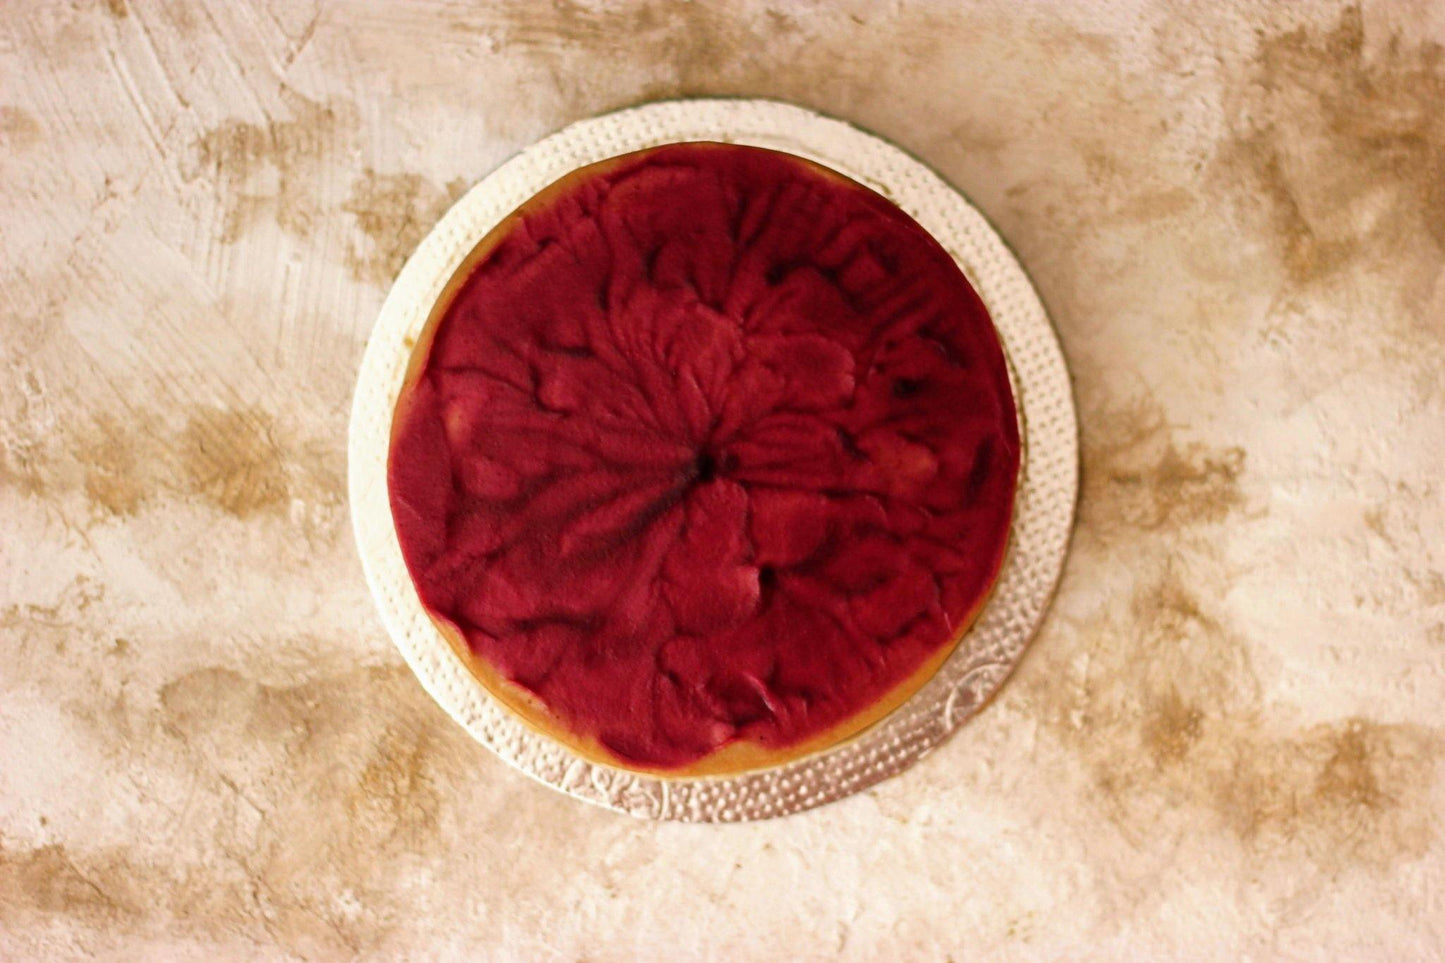 Velvet Rose Cake - Pomegranate and Vanilla sponge with a Cashew Cream Cheese Icing (600g) - Sampoorna Ahara - Healthy Food, Food Delivery, Food Order Online, Healthy Snacks, Healthy Breakfast, Sourdough Breads, Sugar-free Desserts